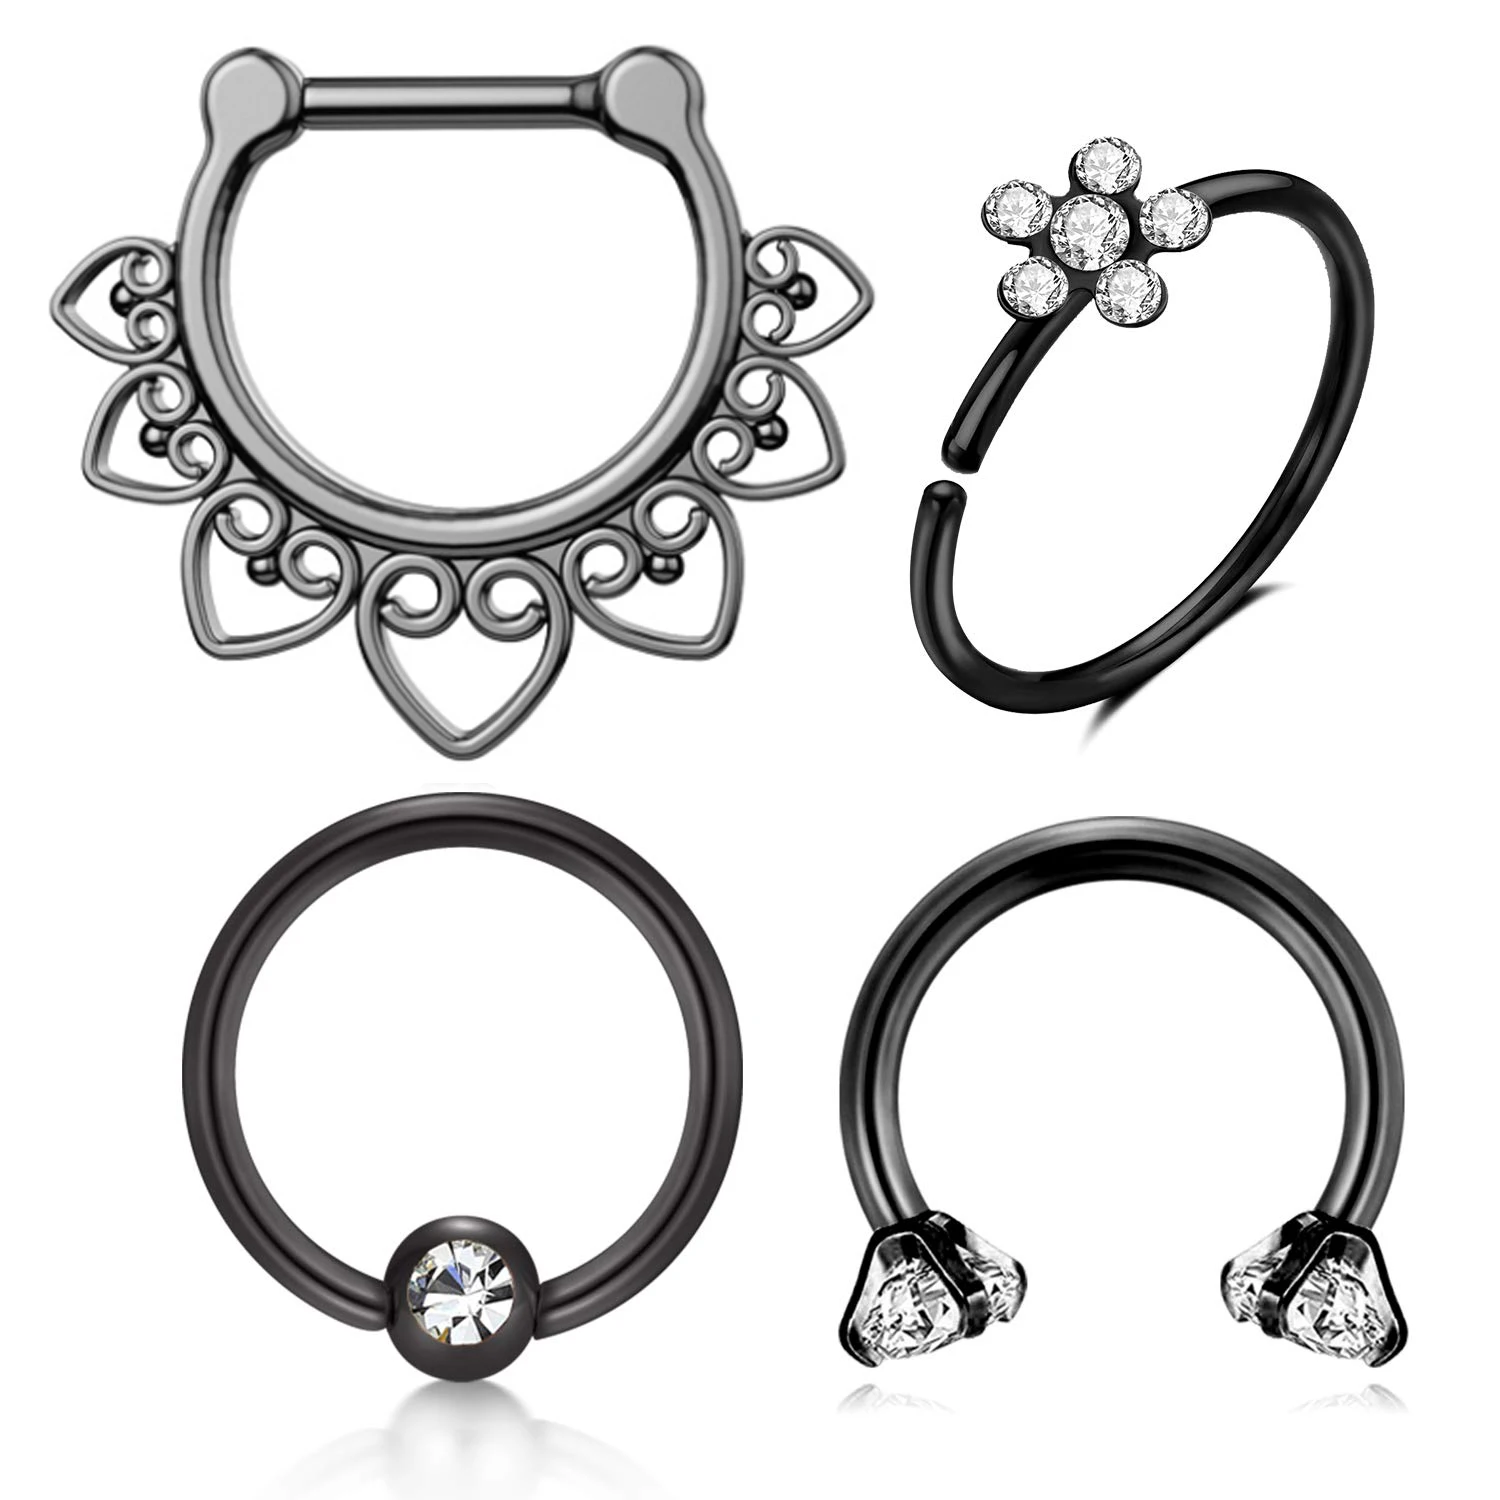 

4 Pcs Black Stainless Steel Tragus Cartilage Helix Earring Stud Labret Lip Rings Daith Rook Conch Nose Hoop Piercing Jewelry